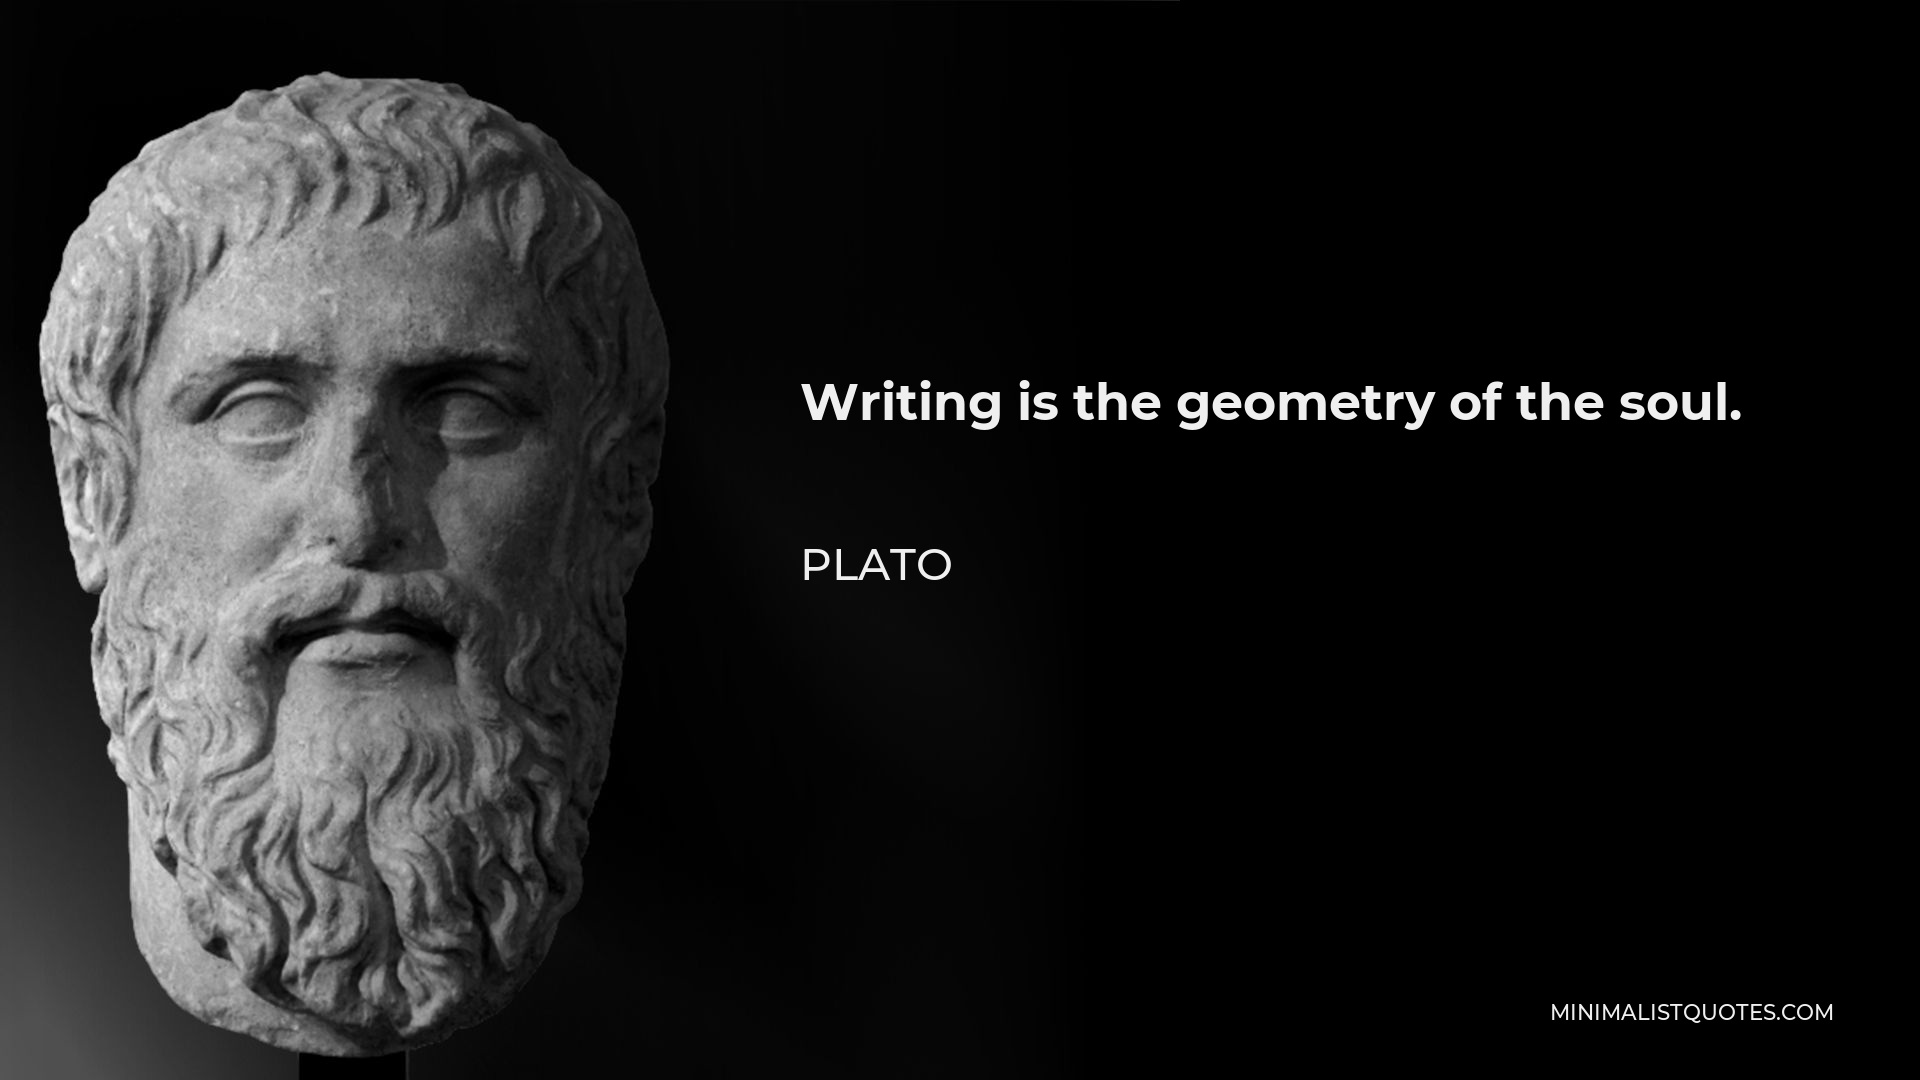 Plato Quote - Writing is the geometry of the soul.